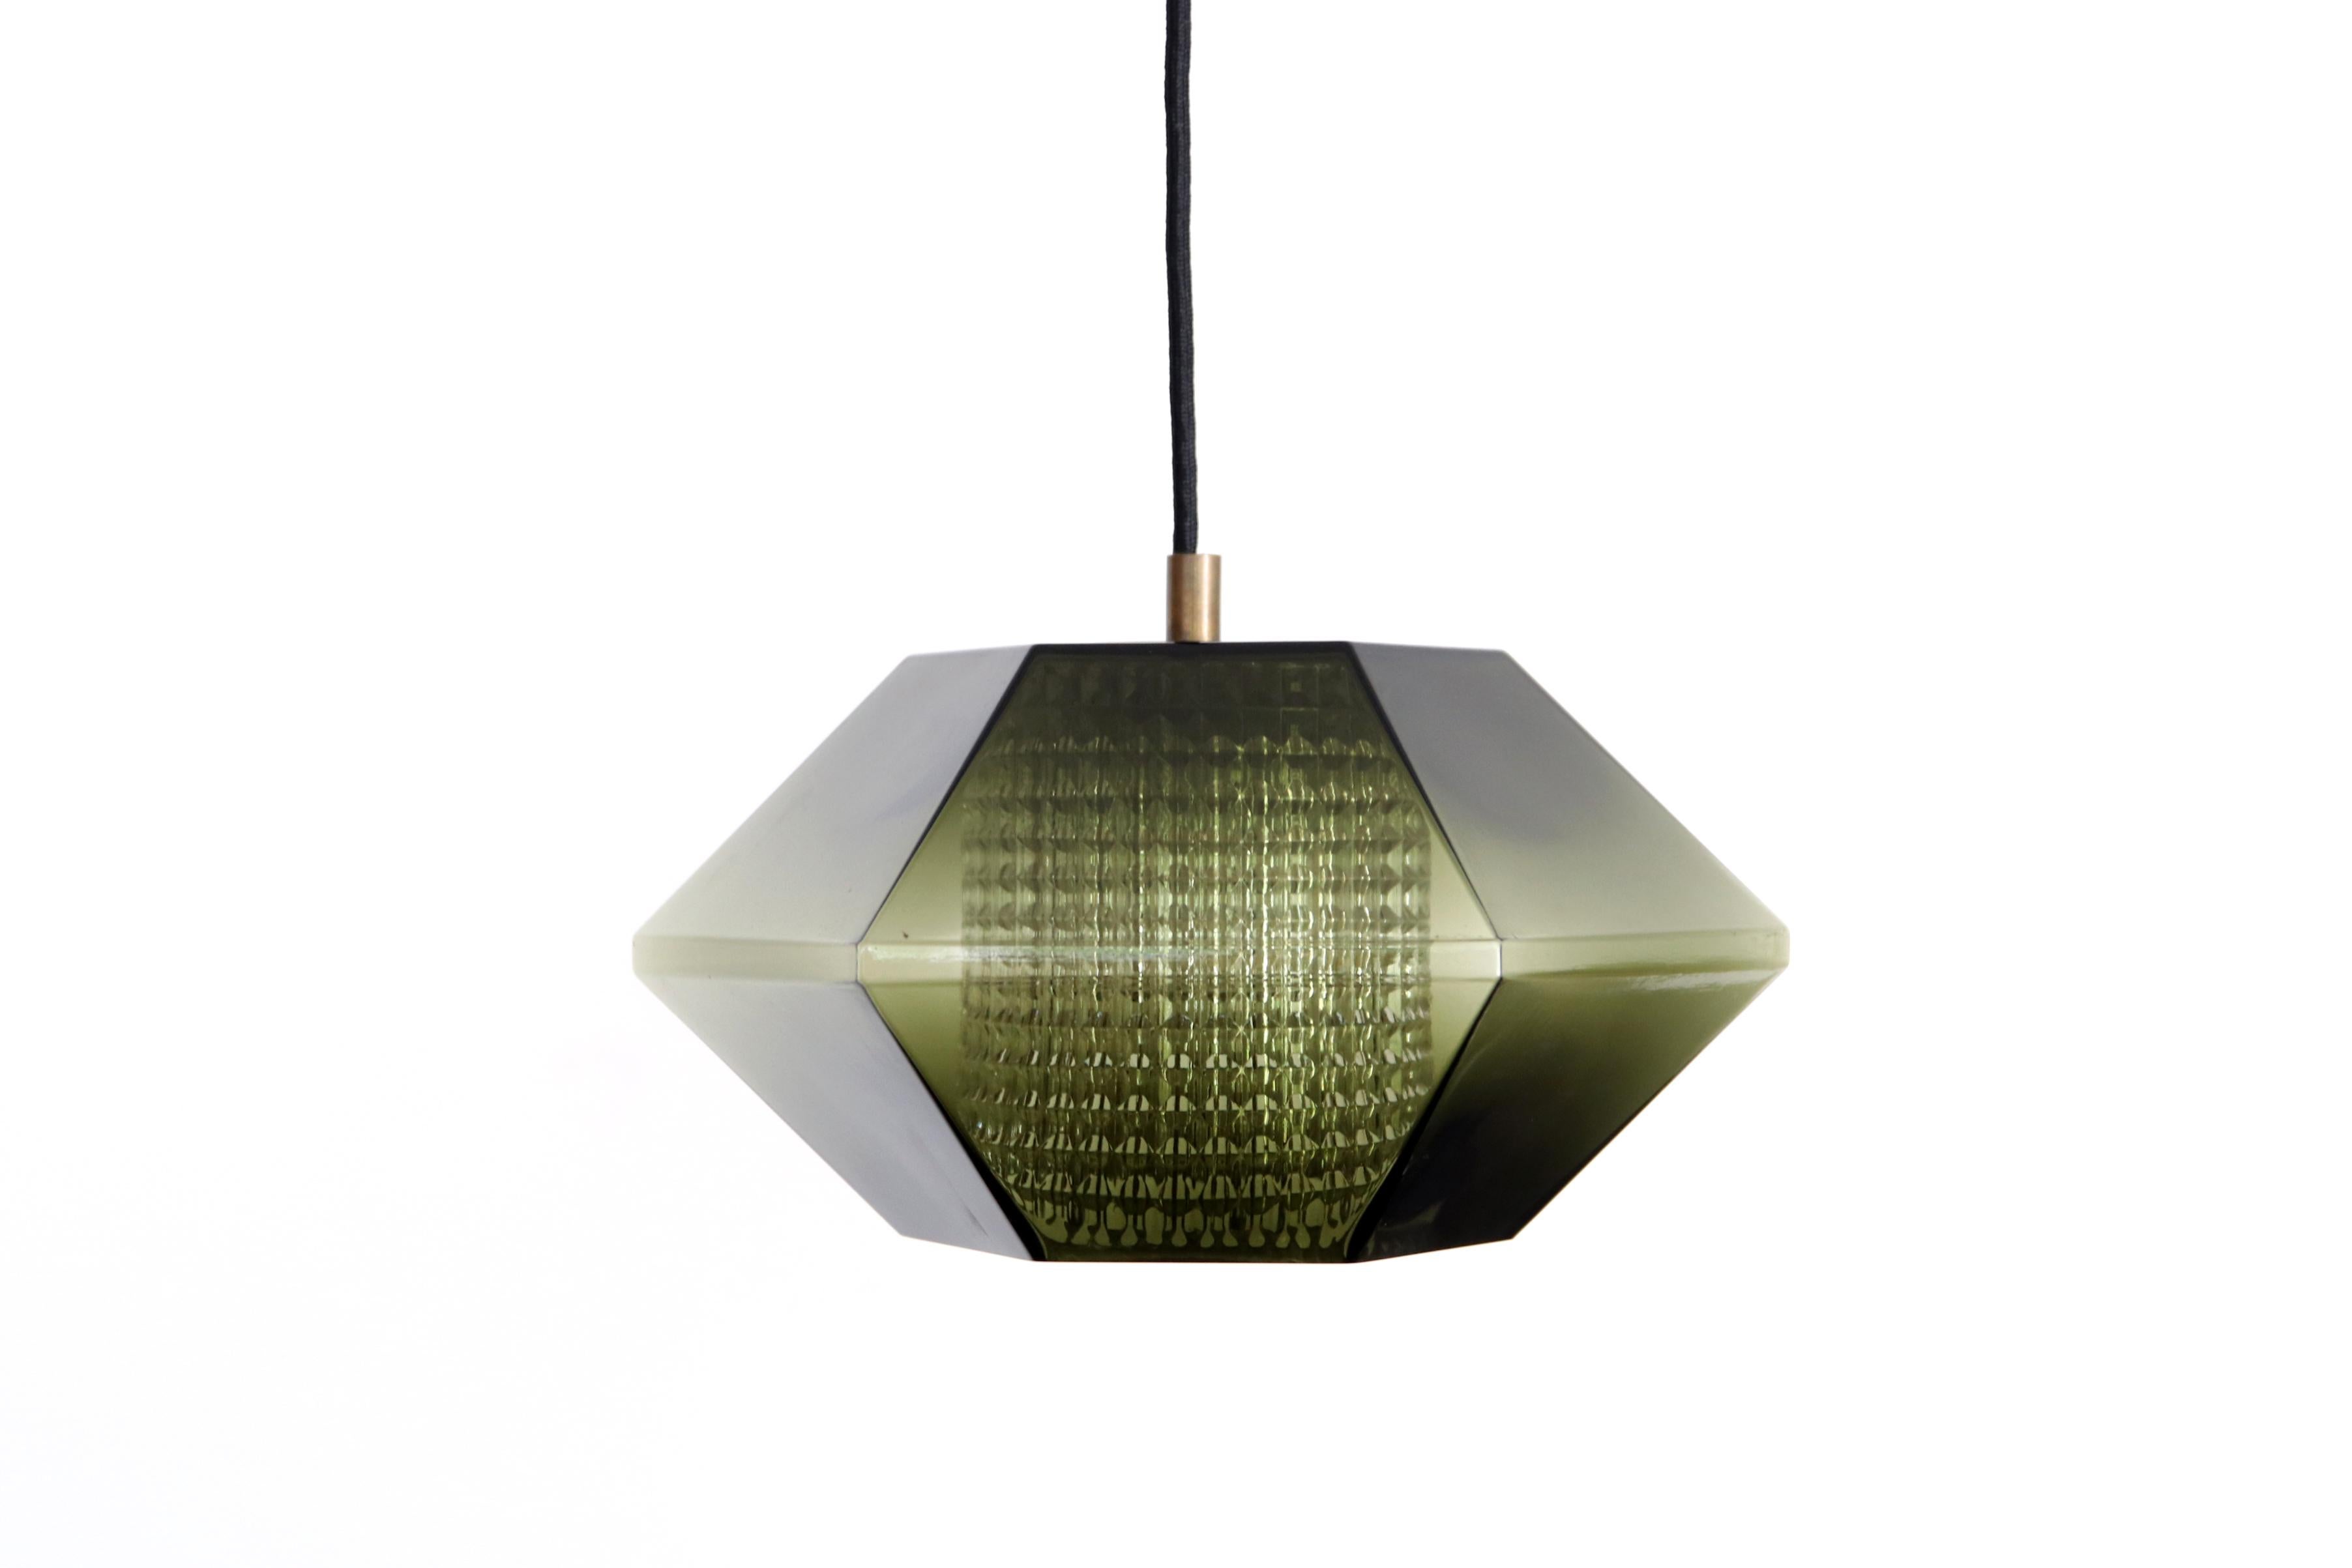 Special set of lamps by Carl Fagerlund for Orrefors from Sweden. The lamps have a beautiful hexagonal shape of beautiful dark green glass, with a cylindrical crystal glass diffuser inside. The lamps have brass details. In short, a beautiful and rare